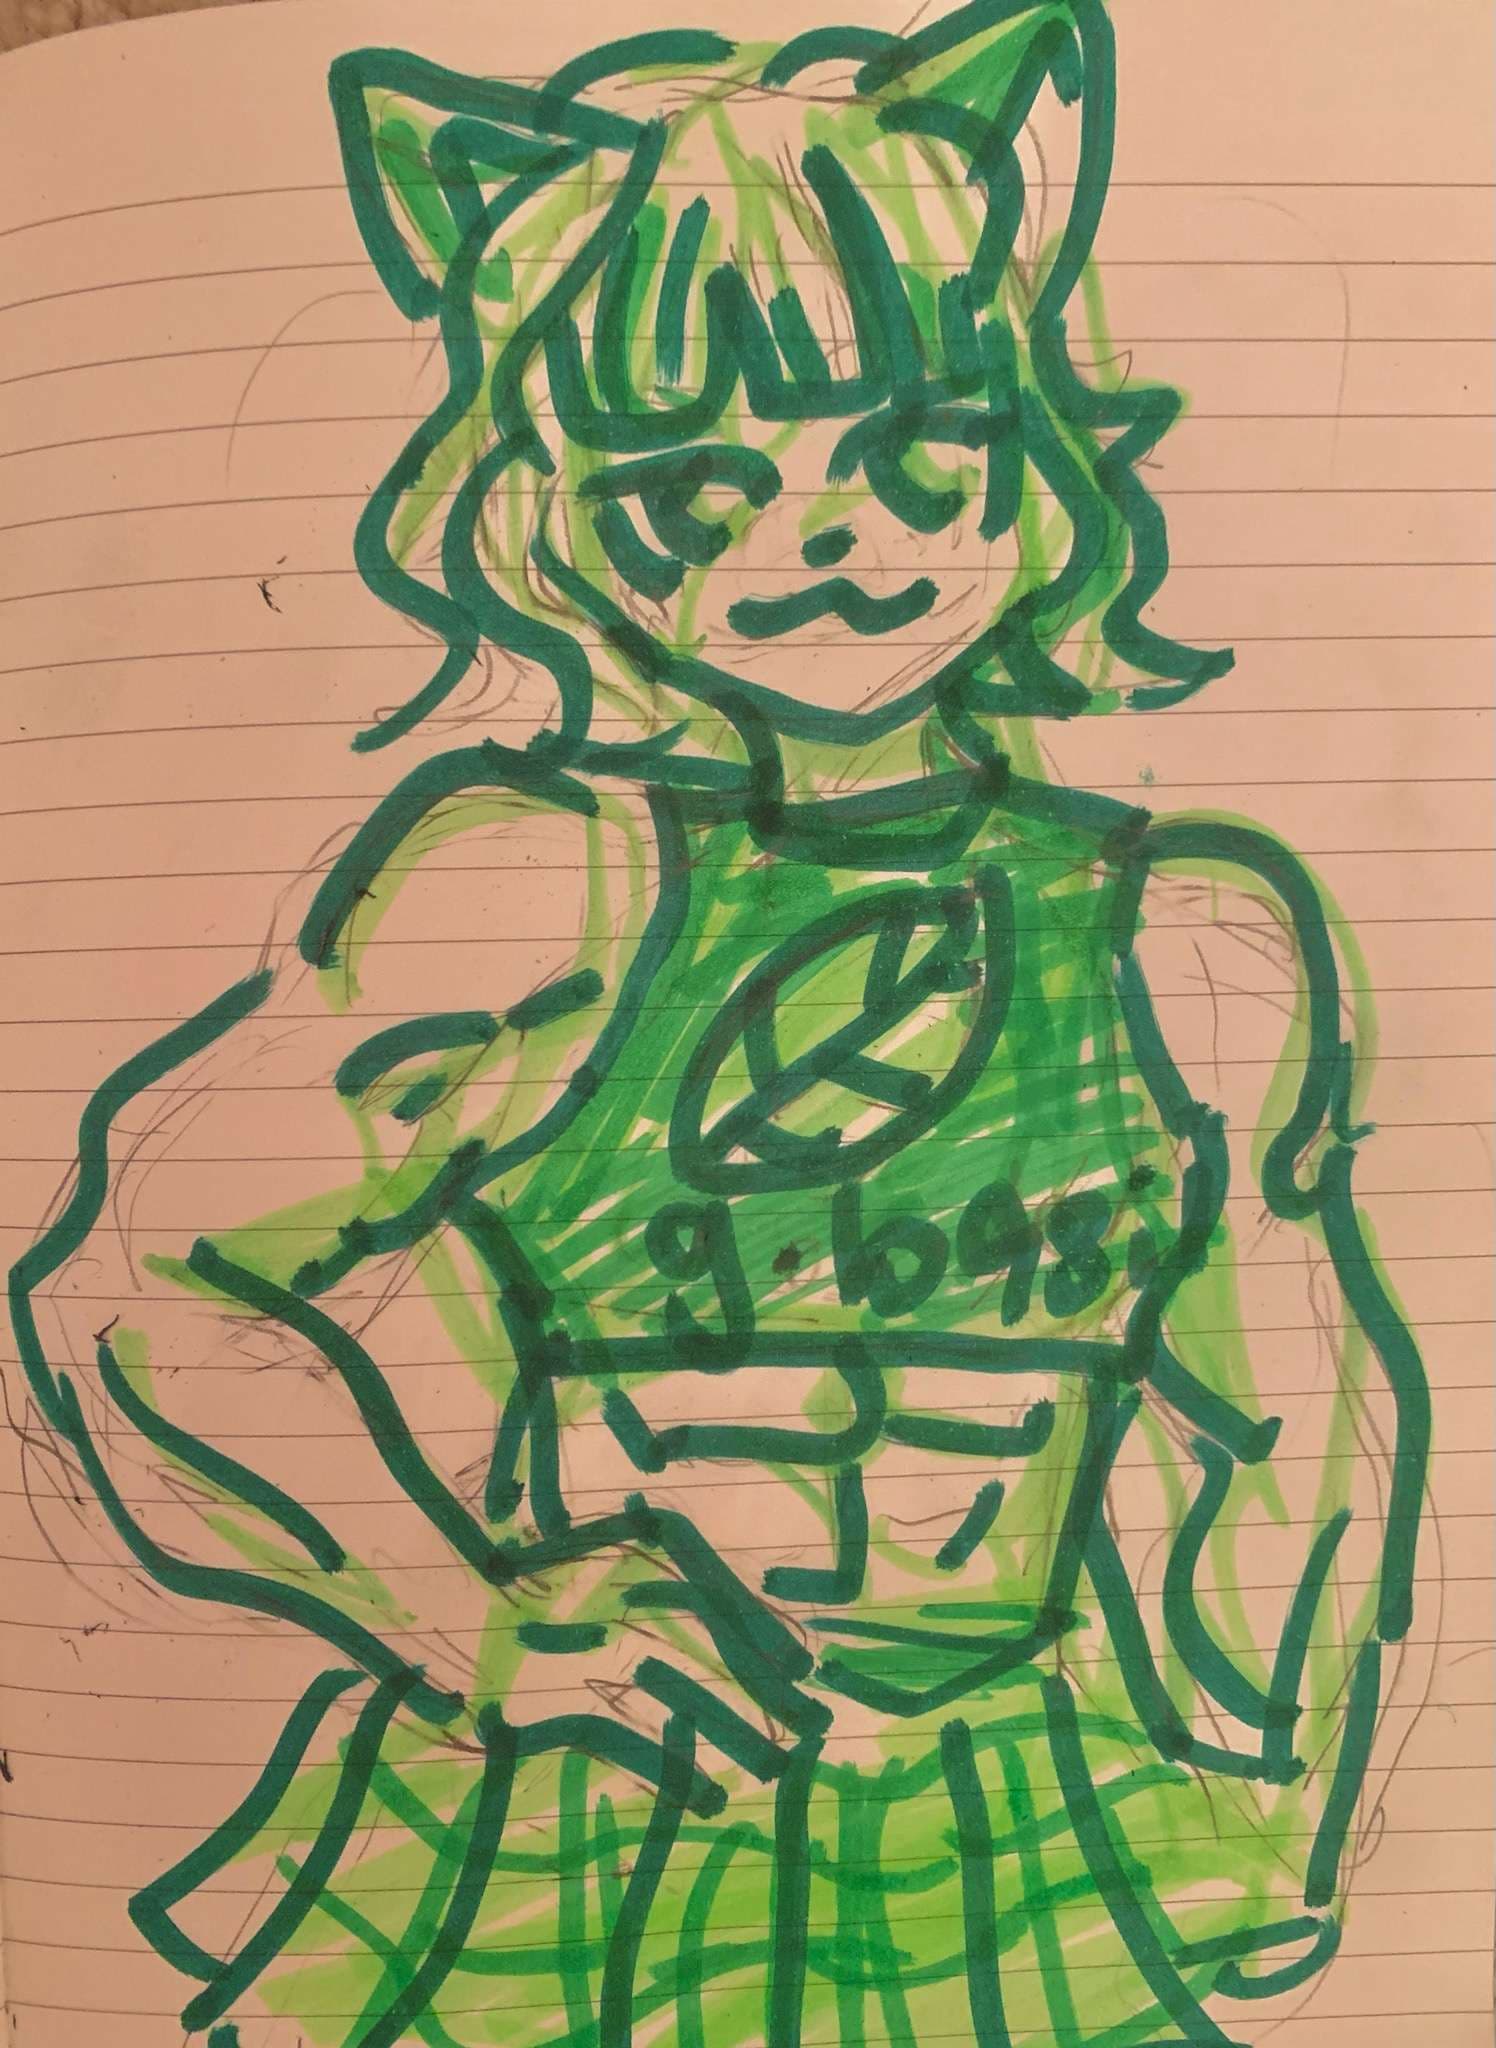 A photo of a drawing of a muscular, messy-haired catgirl wearing a light green, plaid, pleated skirt and a sports bra with "g.basil" written on it, and a basil leaf resembling my logo above the text. One muscular hand rests on her hip, and a six-pack is visible on her abdomen. The drawing is made with three shades of green markers, and a pencil sketch is visible below it.